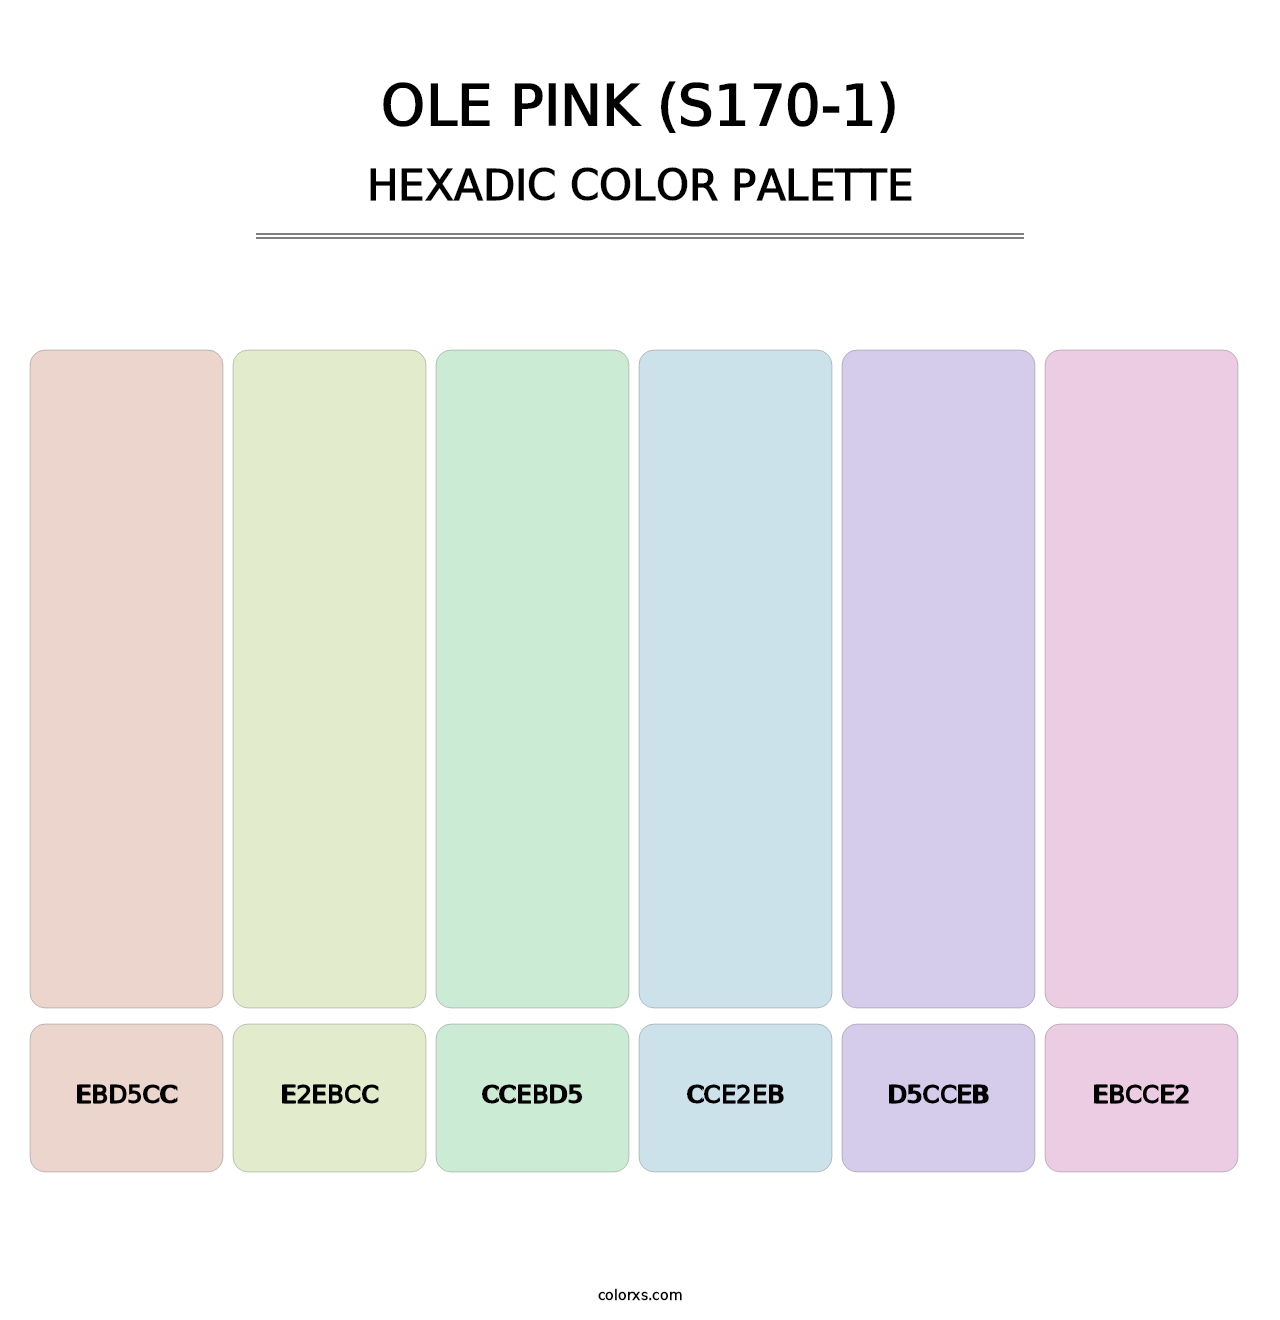 Ole Pink (S170-1) - Hexadic Color Palette